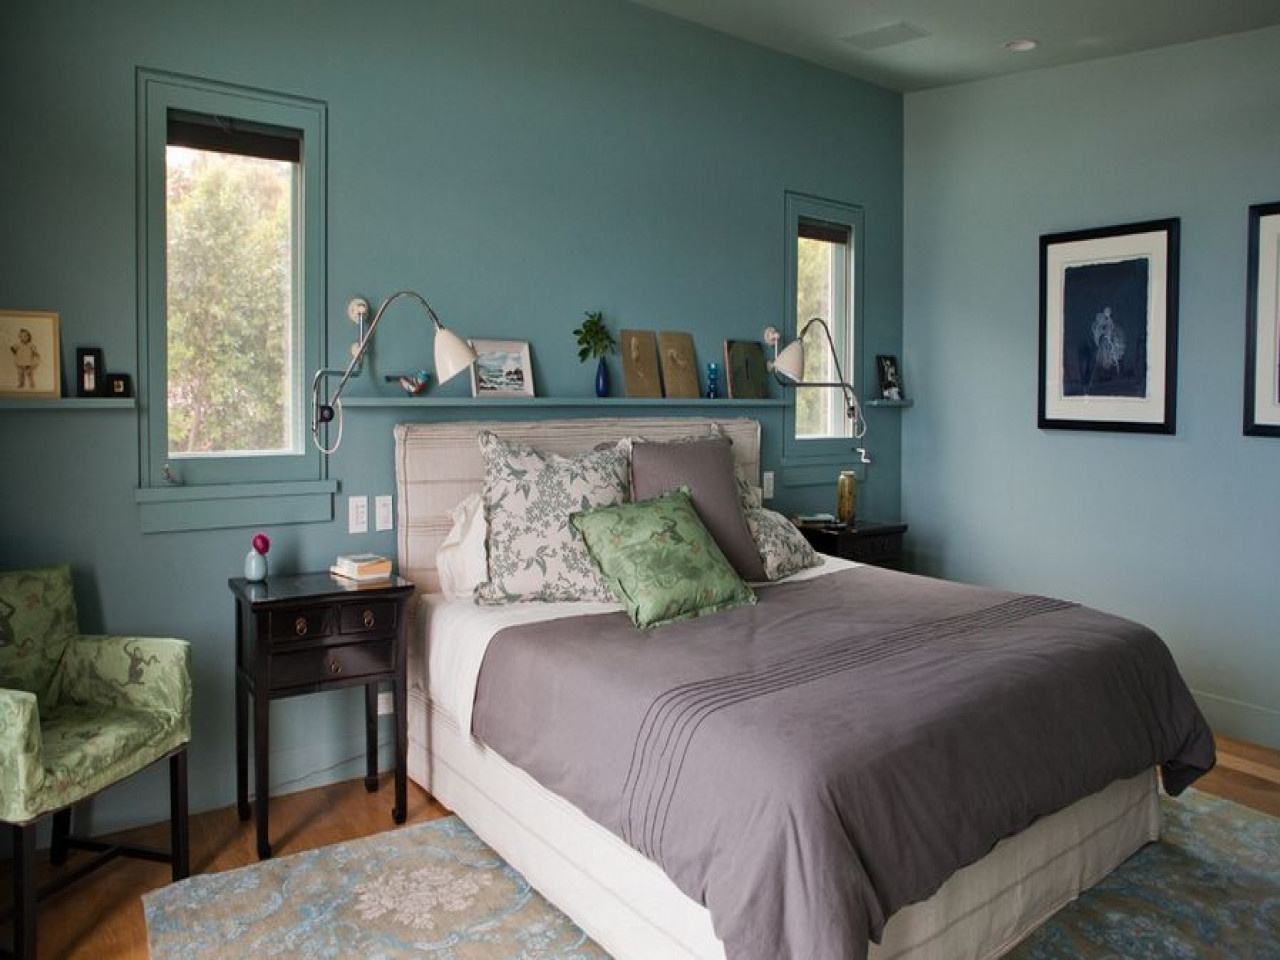 Neutral Paint Colors For Bedrooms
 Paint Color Tips To Make Bedroom Look Romantic Home Ideas